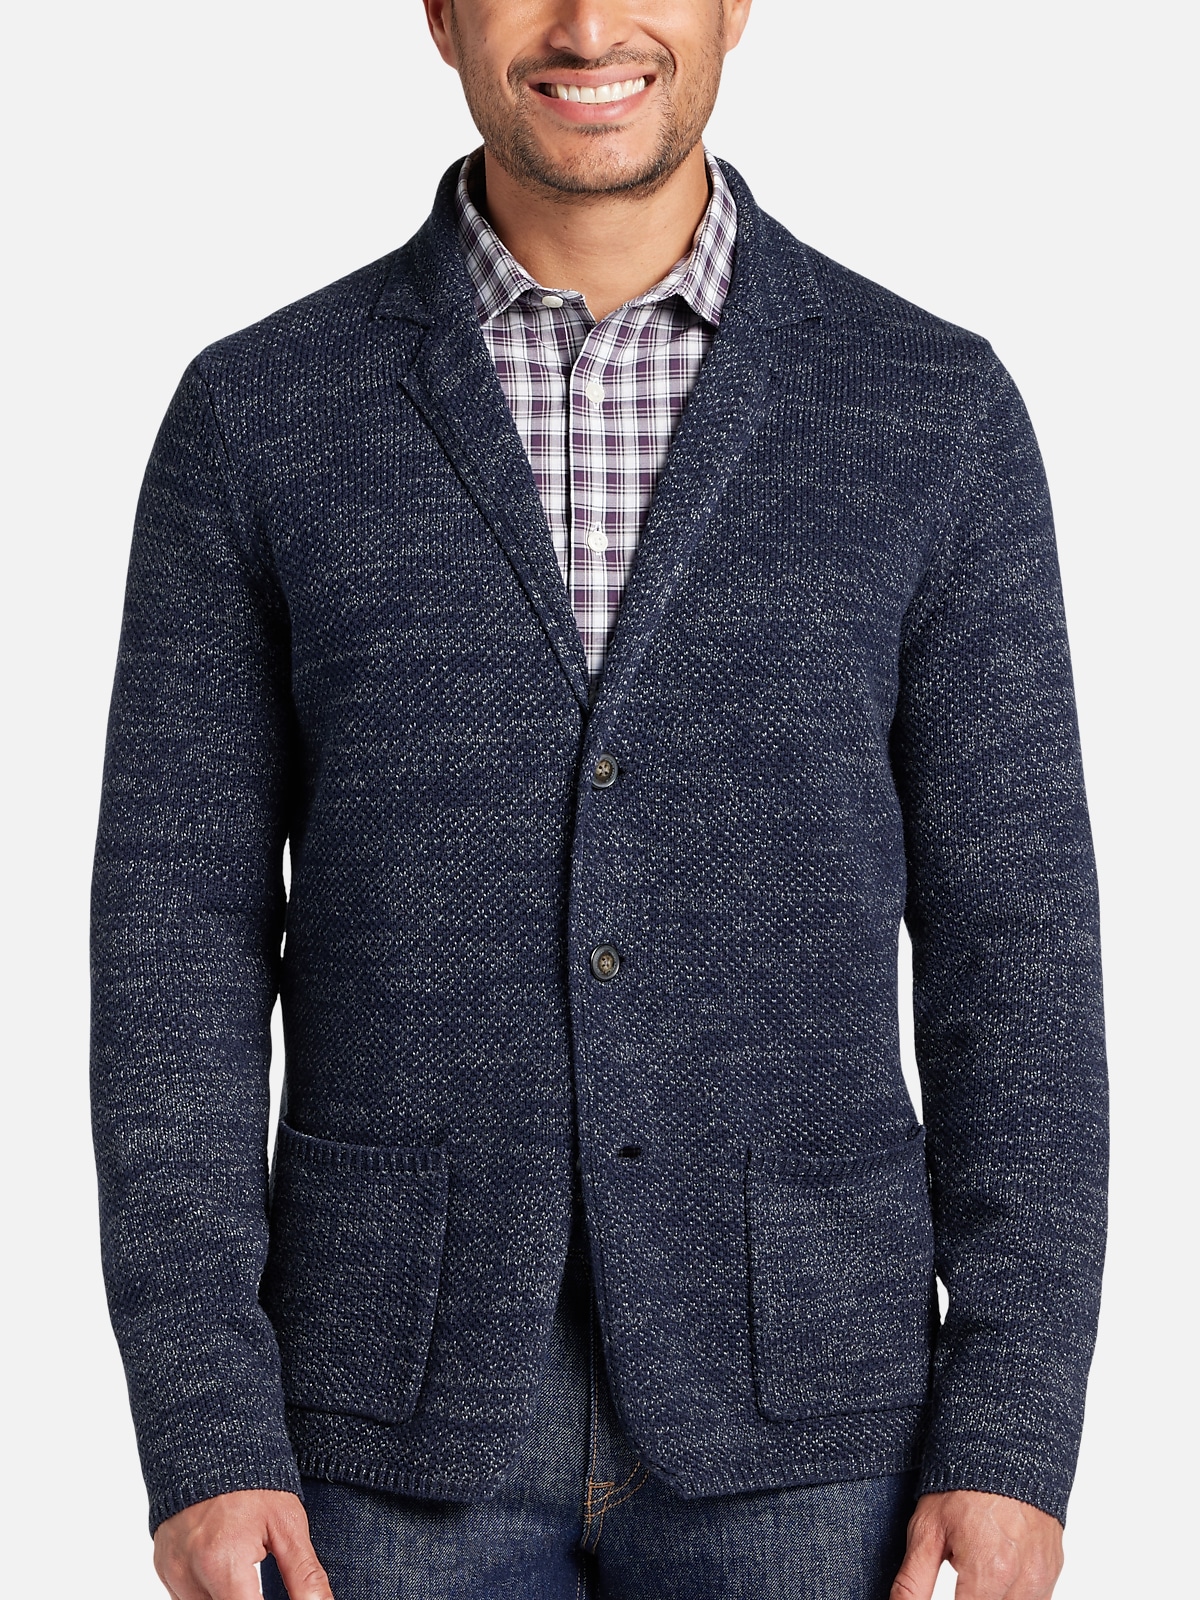 https://image.menswearhouse.com/is/image/TMW/TMW_6NTV_01_JOSEPH_ABBOUD_SWEATERS_NAVY_MAIN?imPolicy=pdp-zoom-mob